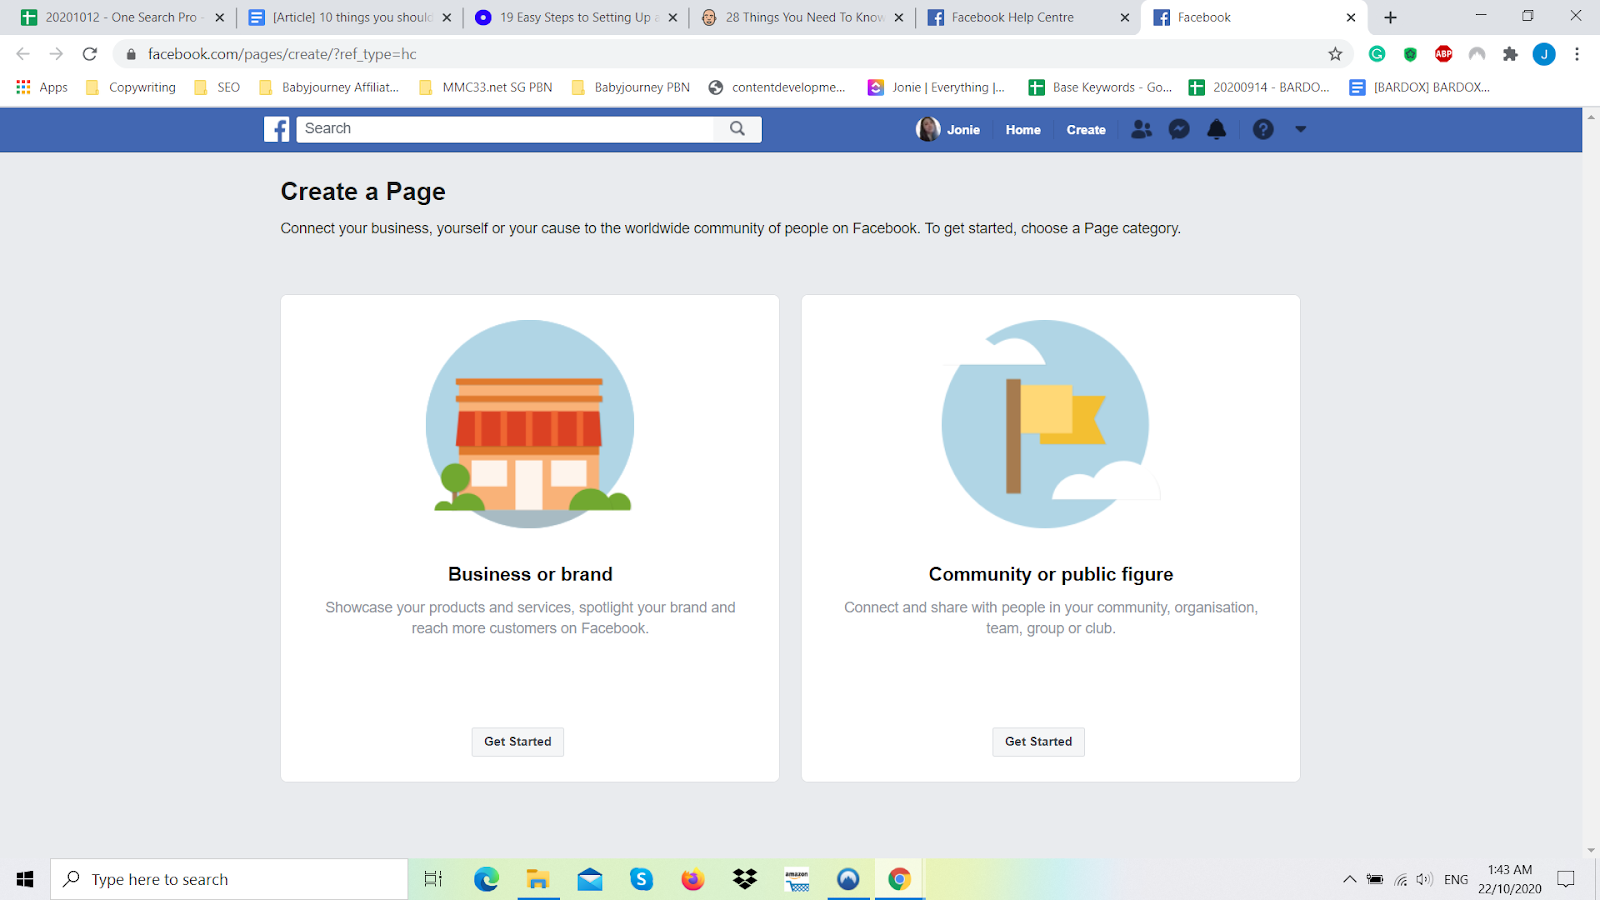 Setting up Facebook Page to Either “Business or Brand” | Managing Your Facebook Page | One Search Pro Digital Marketing